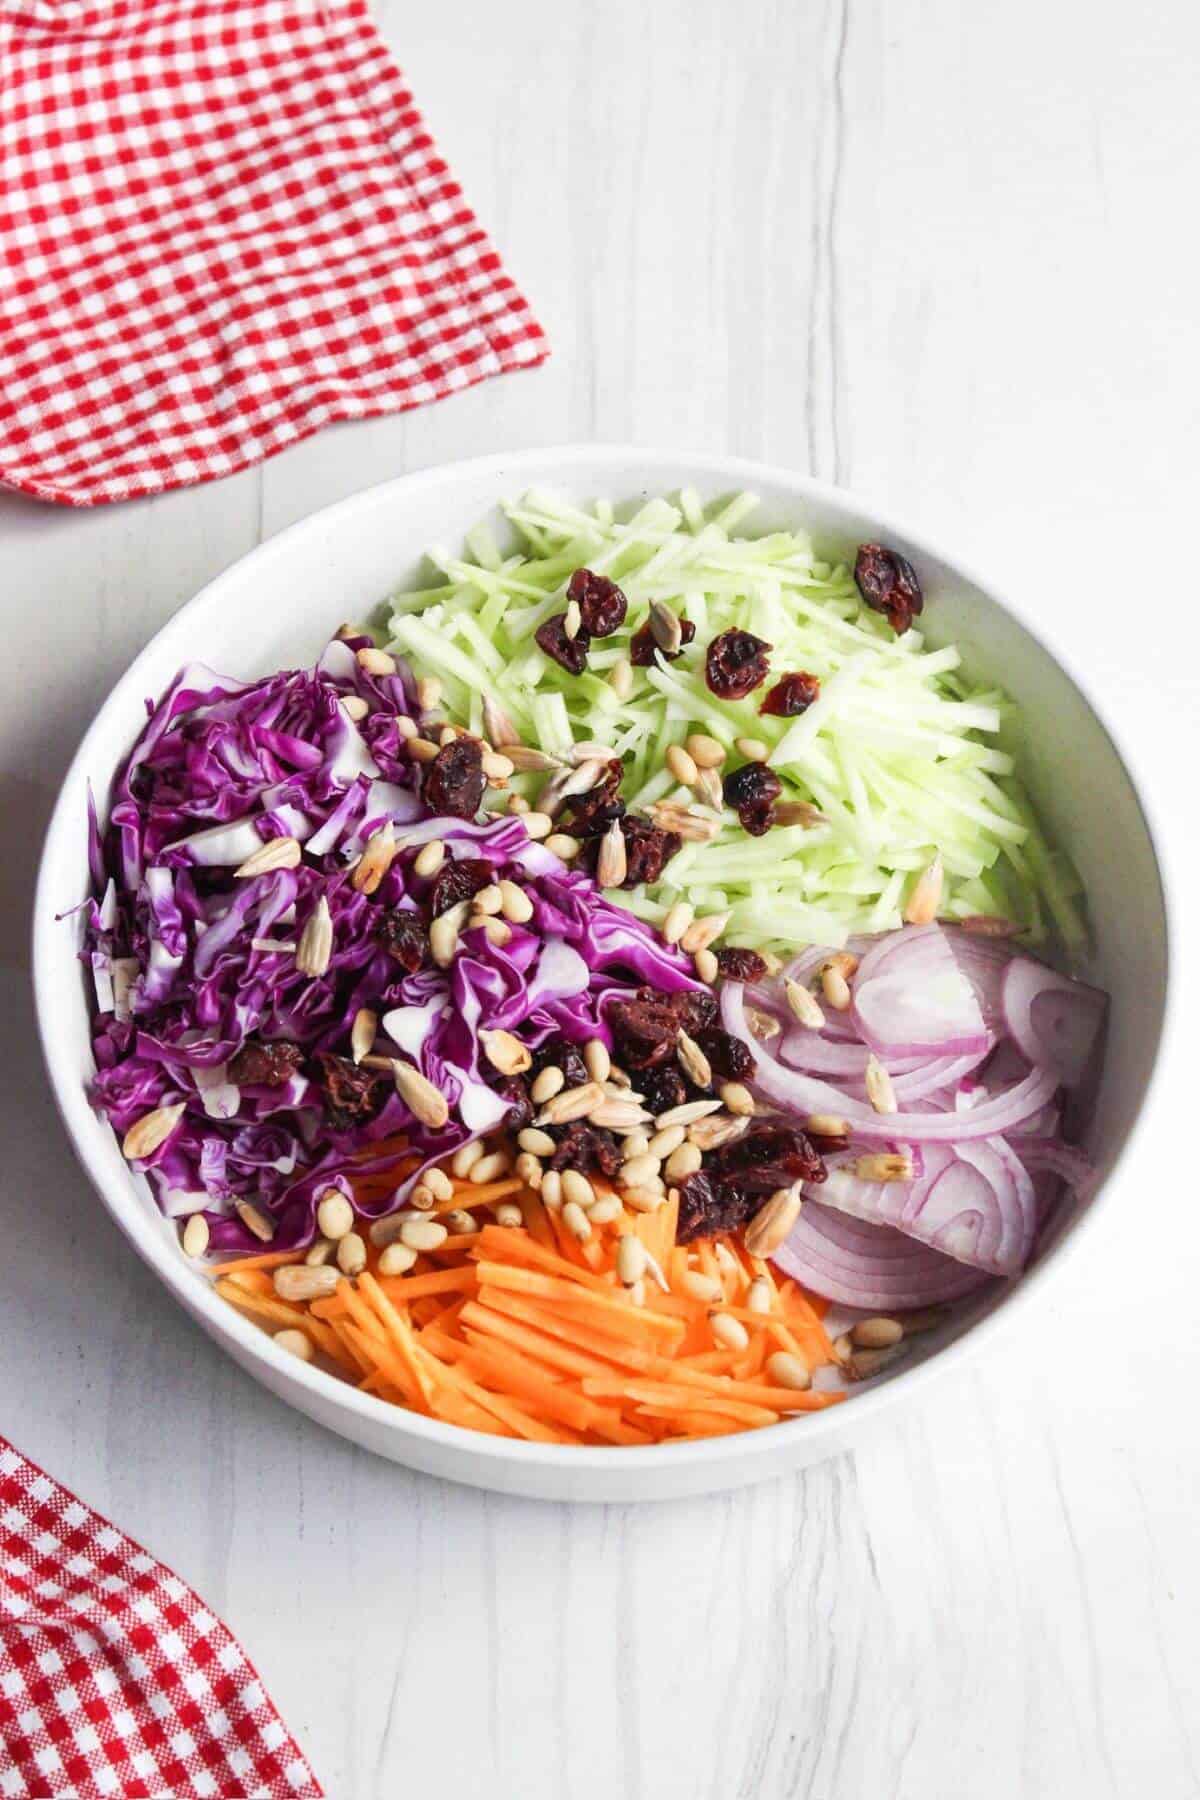 A bowl filled with broccoli slaw ingredients.